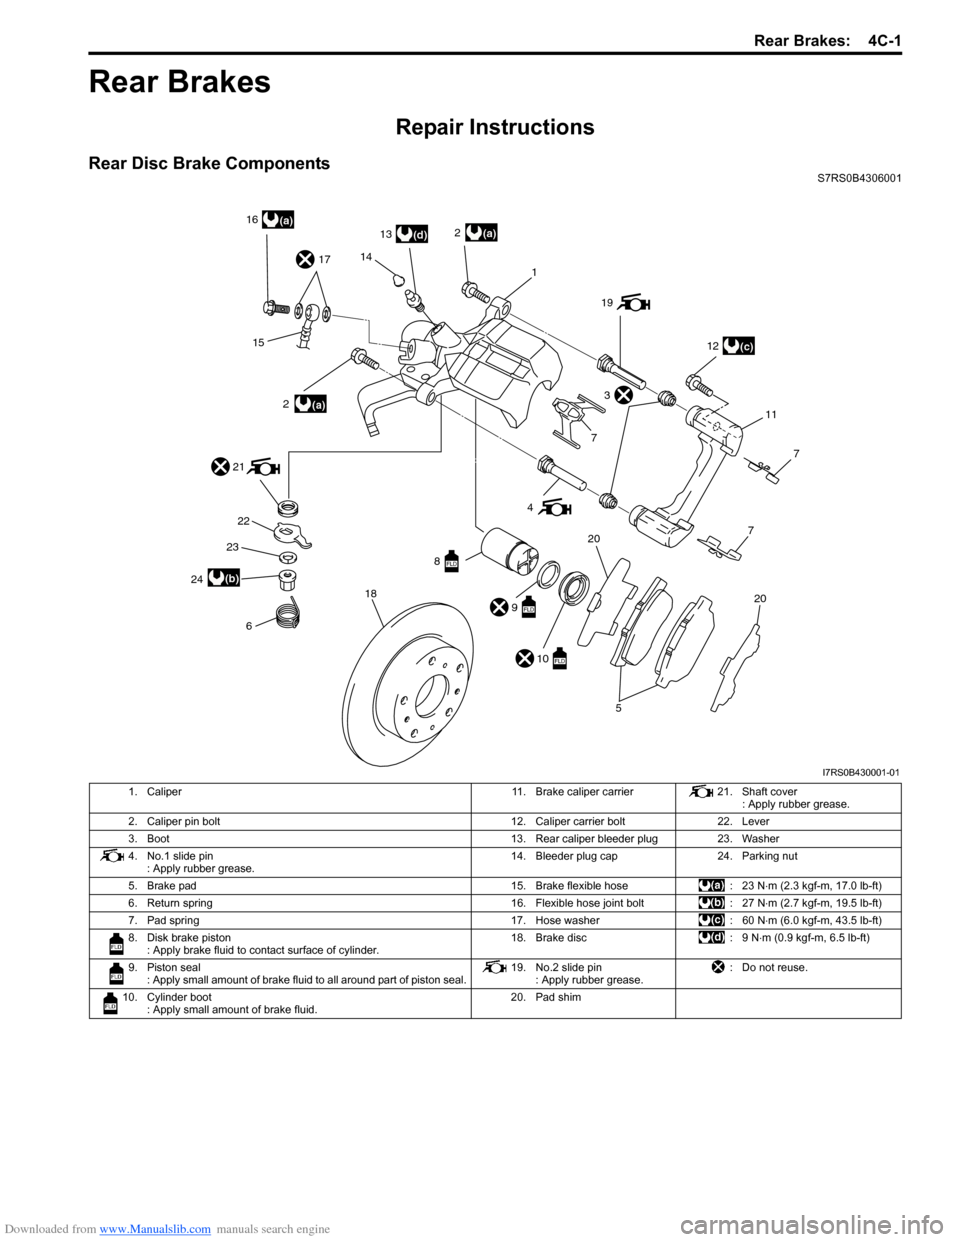 SUZUKI SWIFT 2007 2.G Service Workshop Manual Downloaded from www.Manualslib.com manuals search engine Rear Brakes:  4C-1
Brakes
Rear Brakes
Repair Instructions
Rear Disc Brake ComponentsS7RS0B4306001
(d)
(c)
(a)
(a)
(a)16171413
2
1
15 2 19
12
11